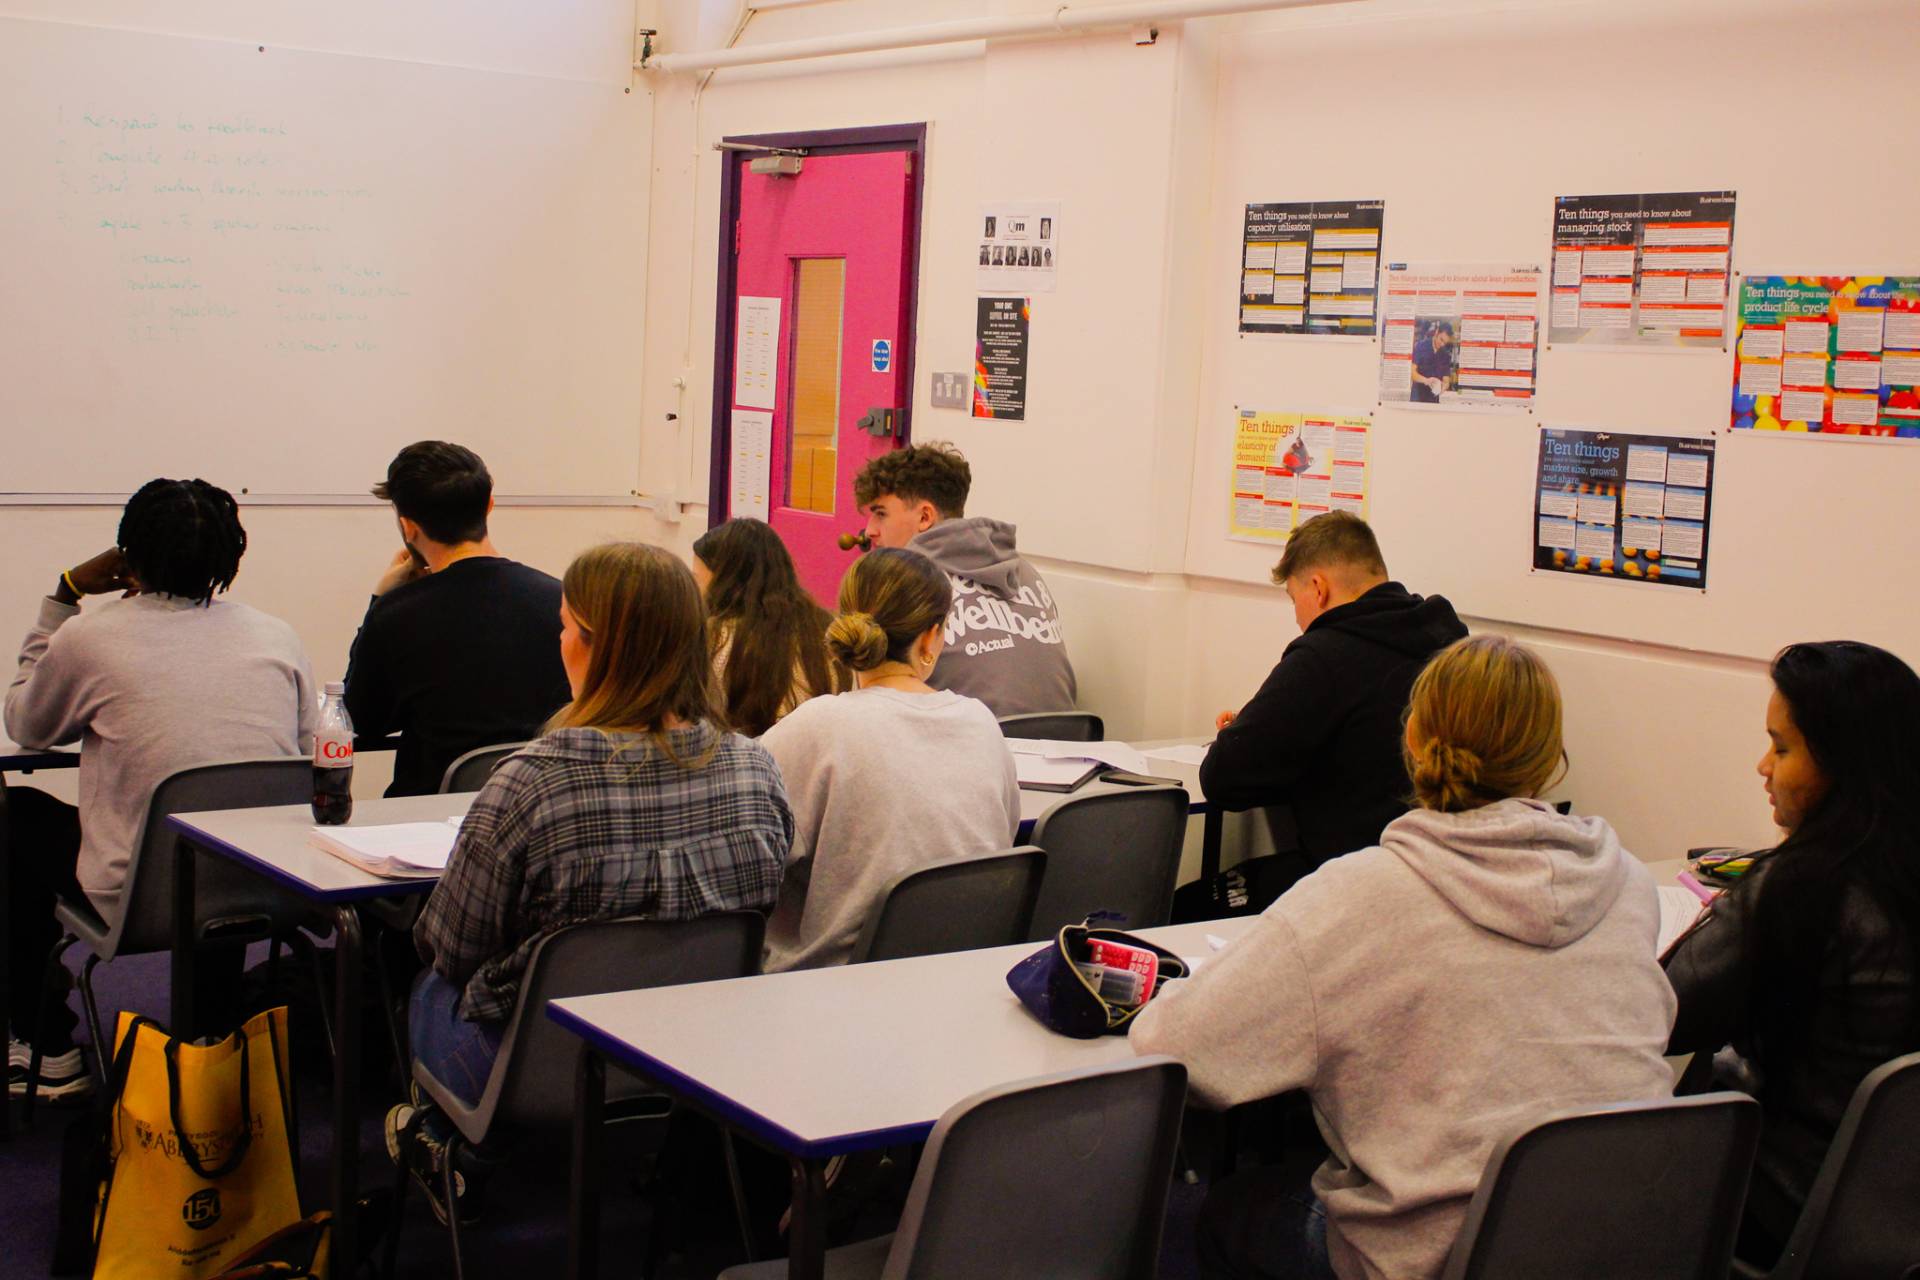 A group of students pictured in a classroom at Queen Mary's College.